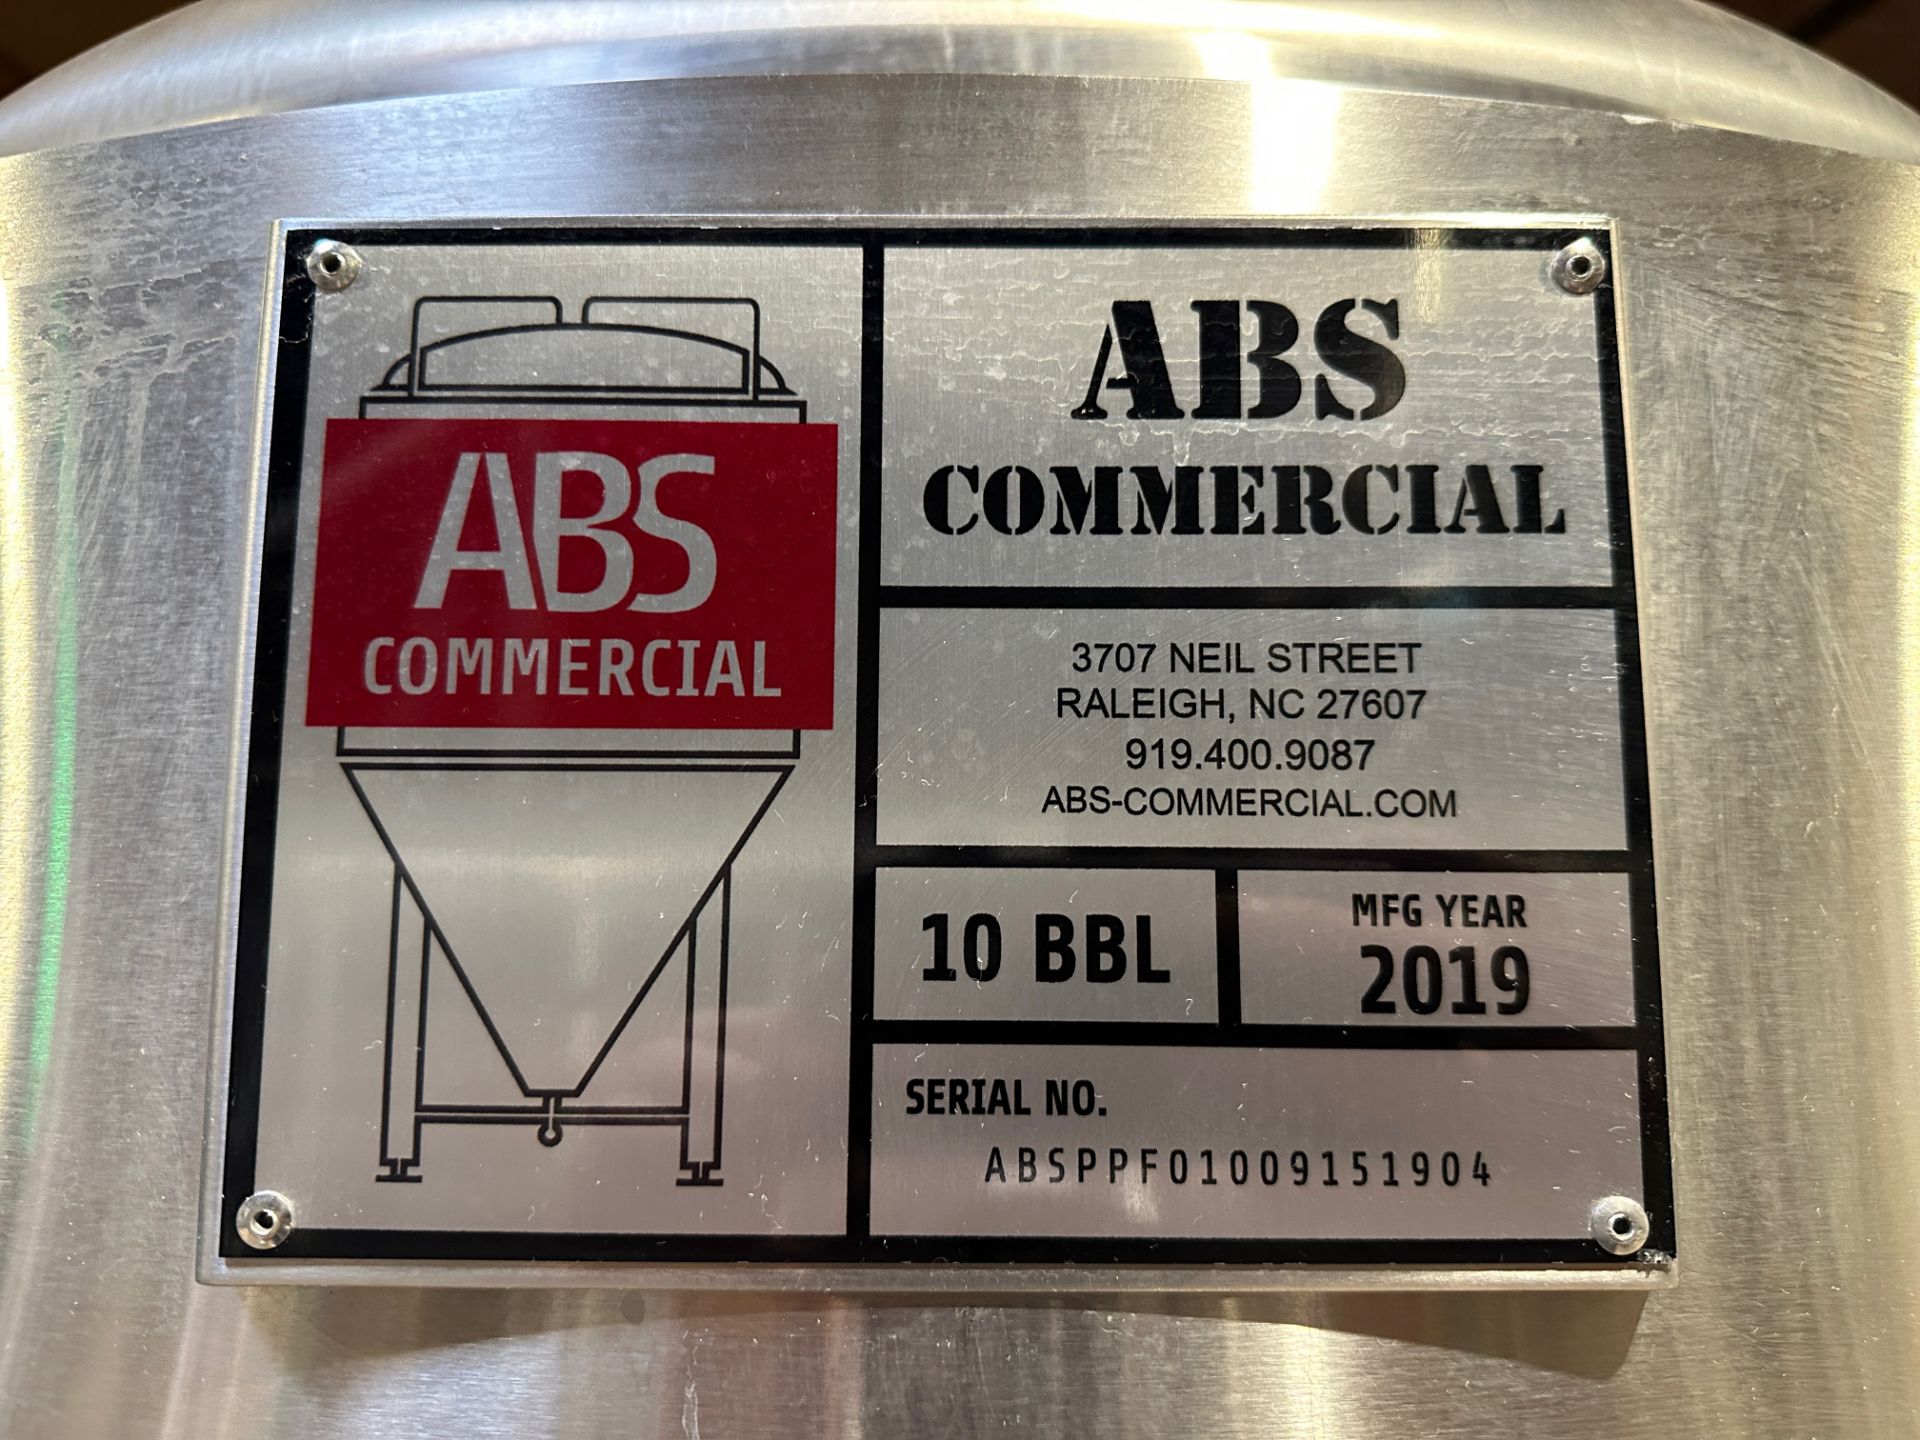 2019 ABS 10 BBL Unitank Fermenter - Cone Bottom, Glycol Jacketed, Mandoor, Zwickle | Rig Fee $650 - Image 2 of 4